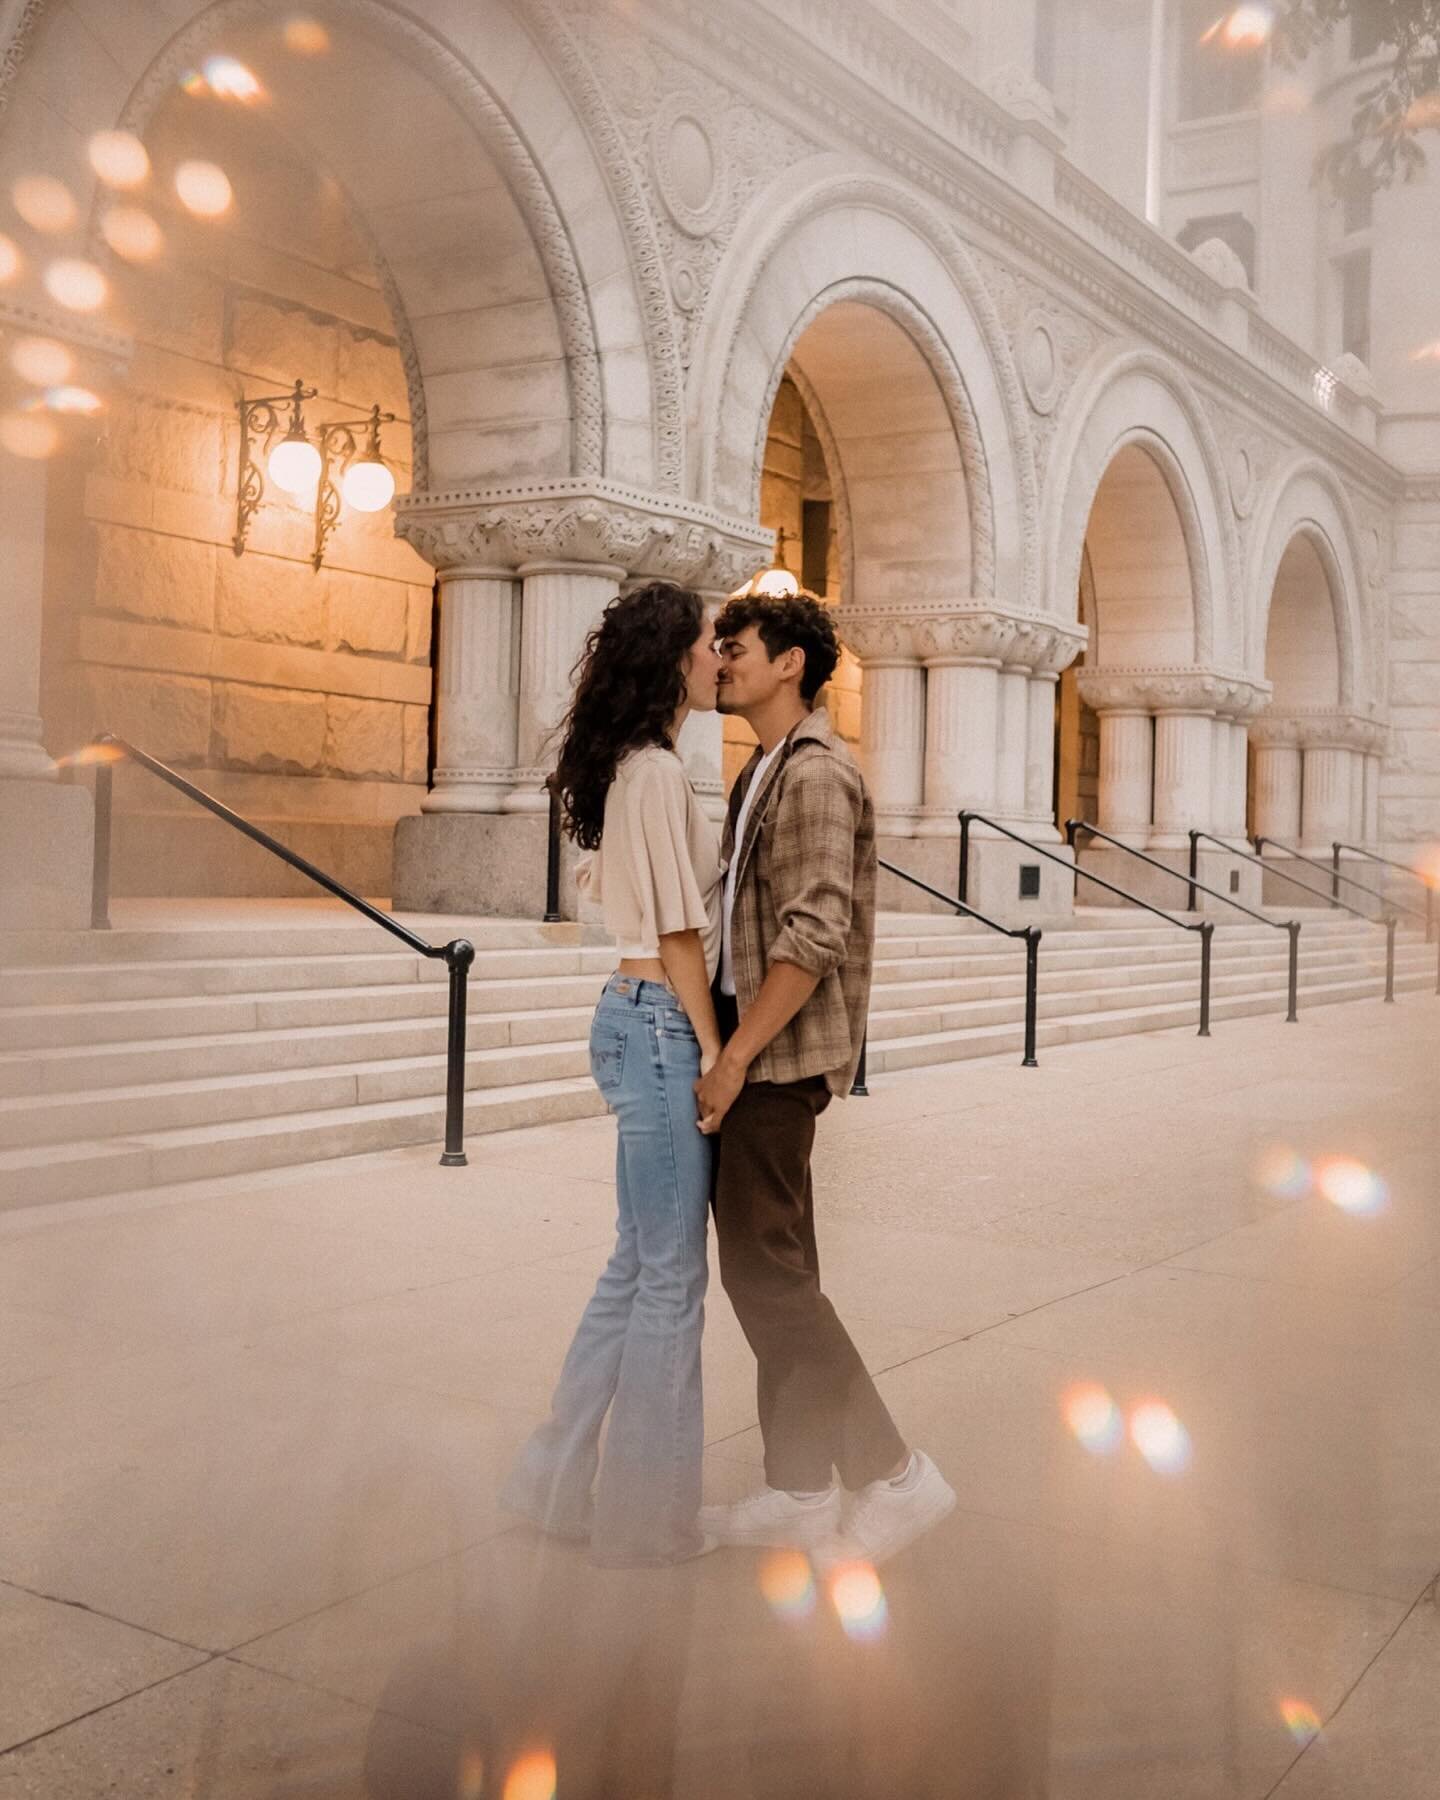 &ldquo;You&rsquo;re the closest to heaven that I&rsquo;ll ever be + I don&rsquo;t wanna go home right now&rdquo; ❤️&zwj;🔥 This couples sesh will forever have me feeling like it&rsquo;s from a movie. These two are so adorable together🤩